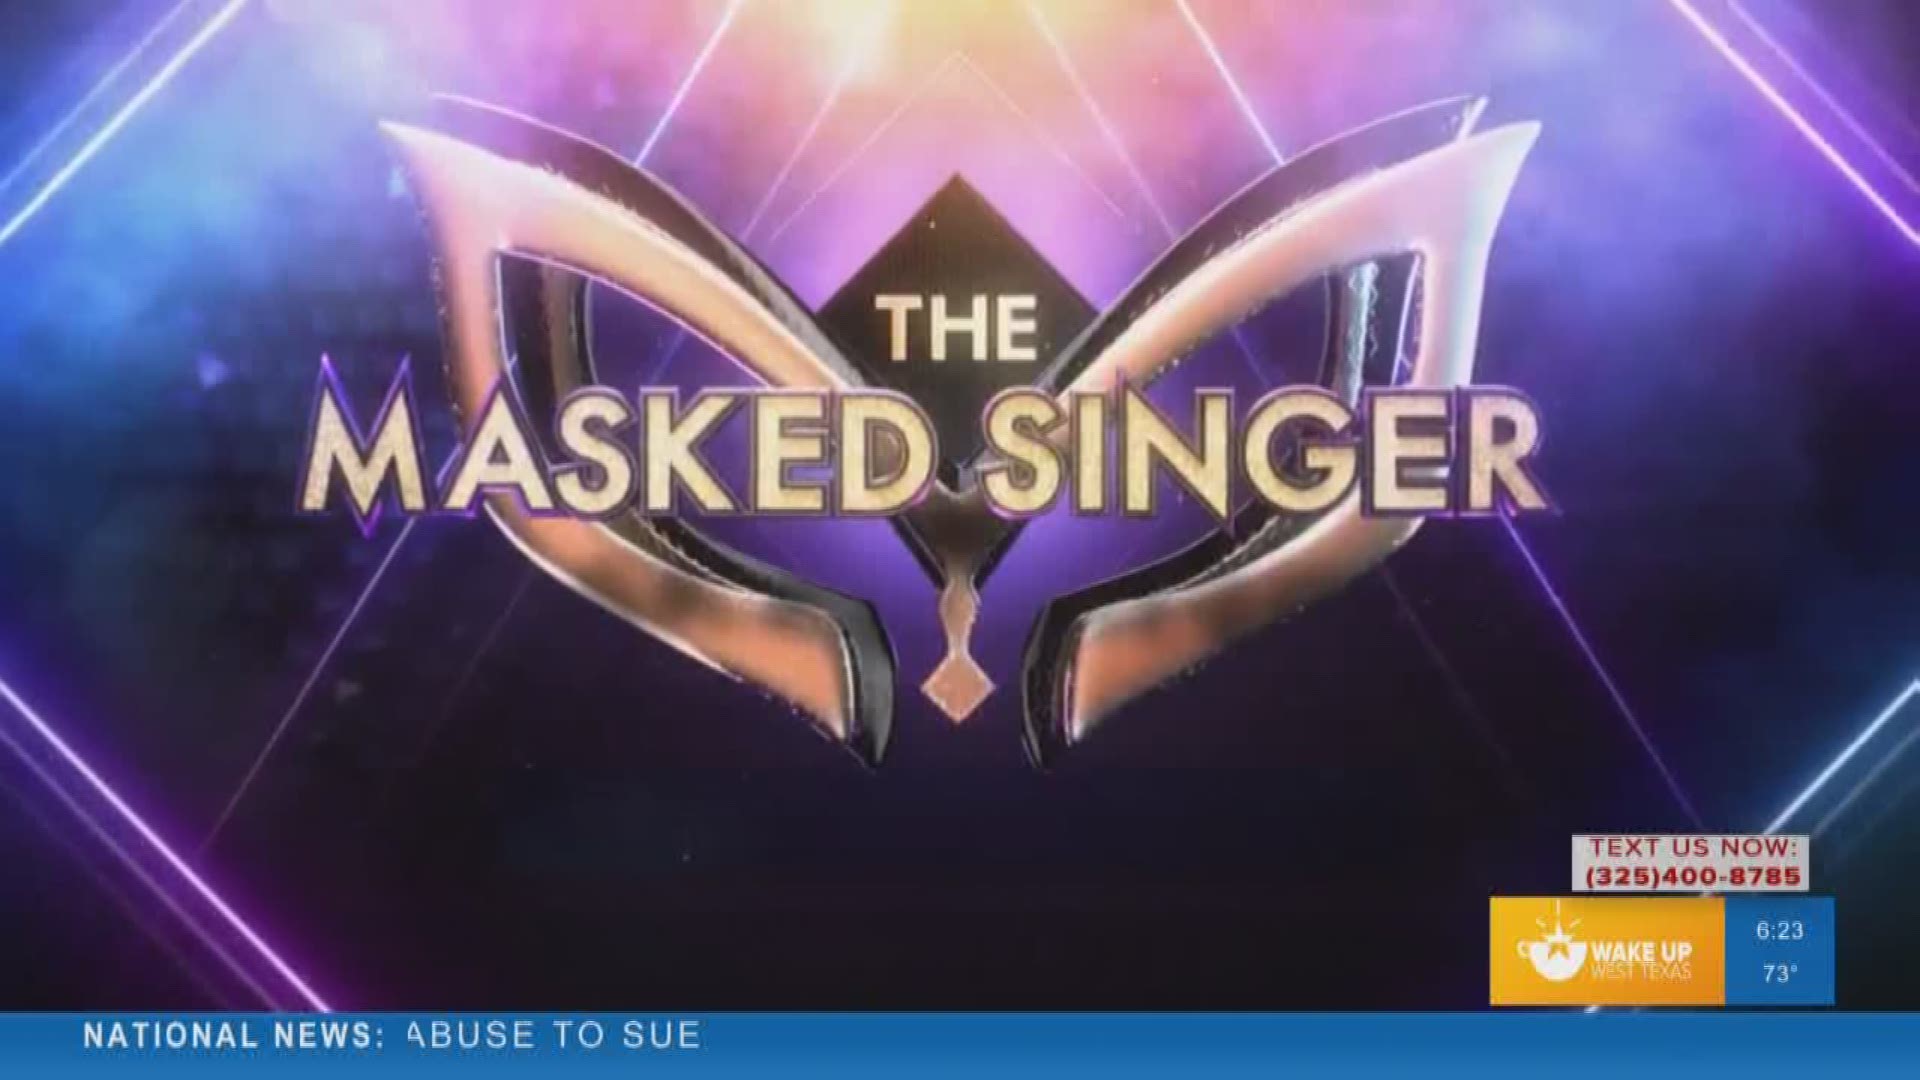 Our Malik Mingo gave a recap of episode 2 of "The Masked Singer." The show airs on FOX West Texas on Wednesdays at 8/7c.